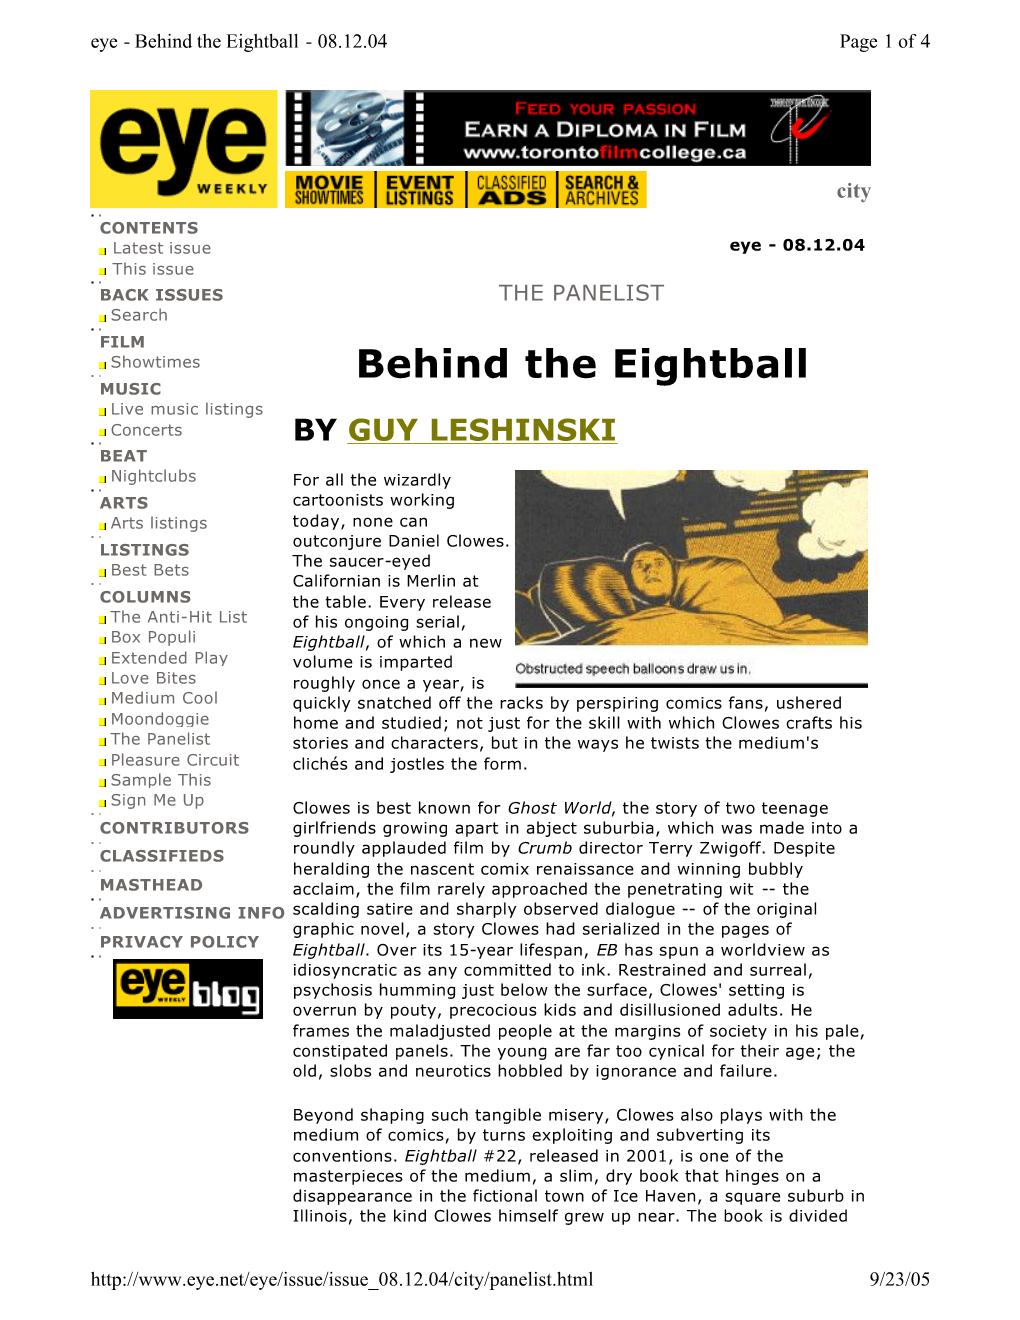 Behind the Eightball - 08.12.04 Page 1 of 4